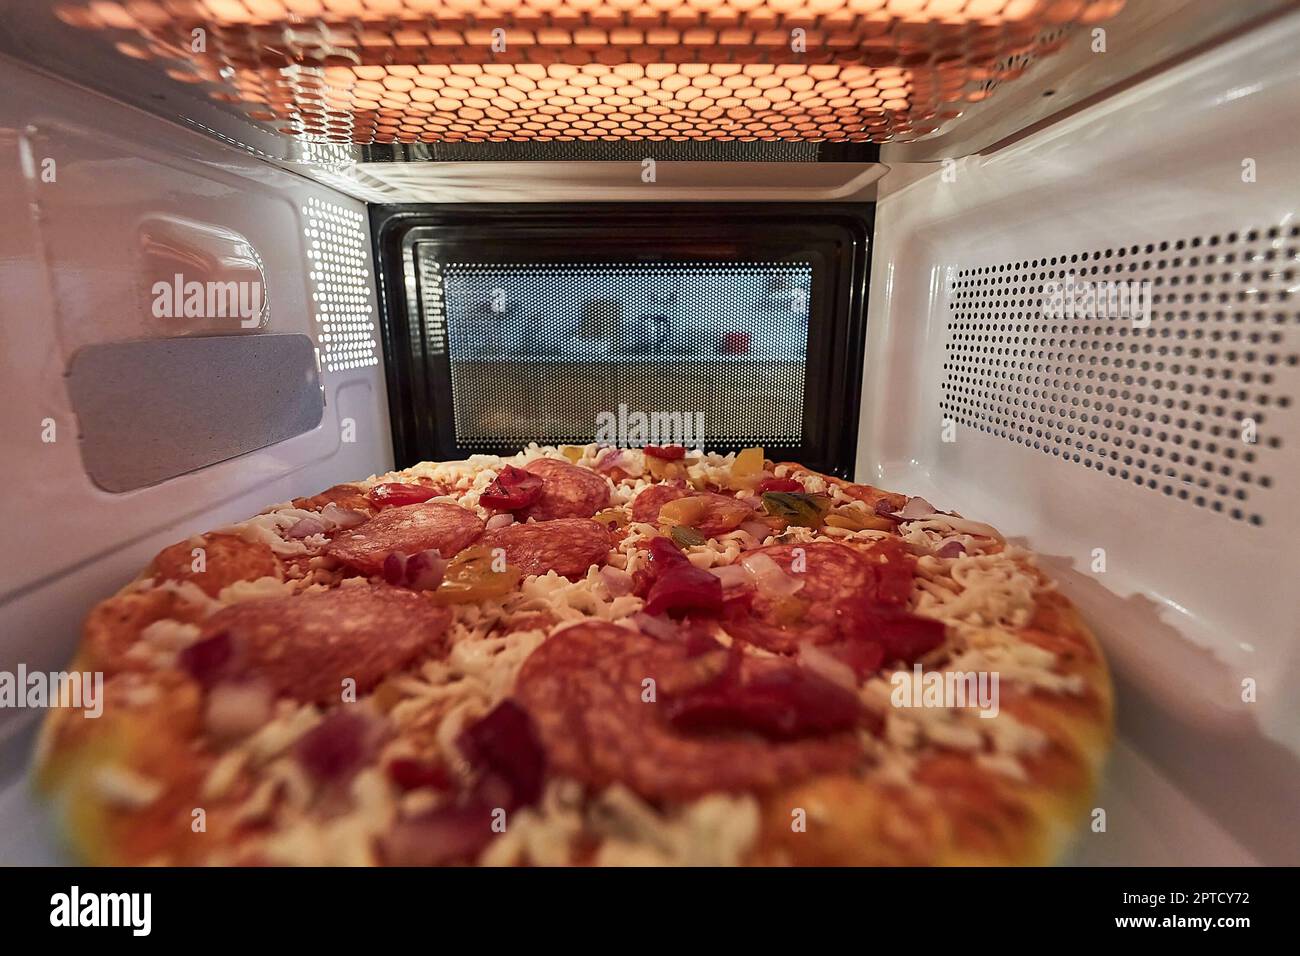 https://c8.alamy.com/comp/2PTCY72/heating-frozen-pizza-in-a-microwave-viewed-from-inside-the-back-2PTCY72.jpg